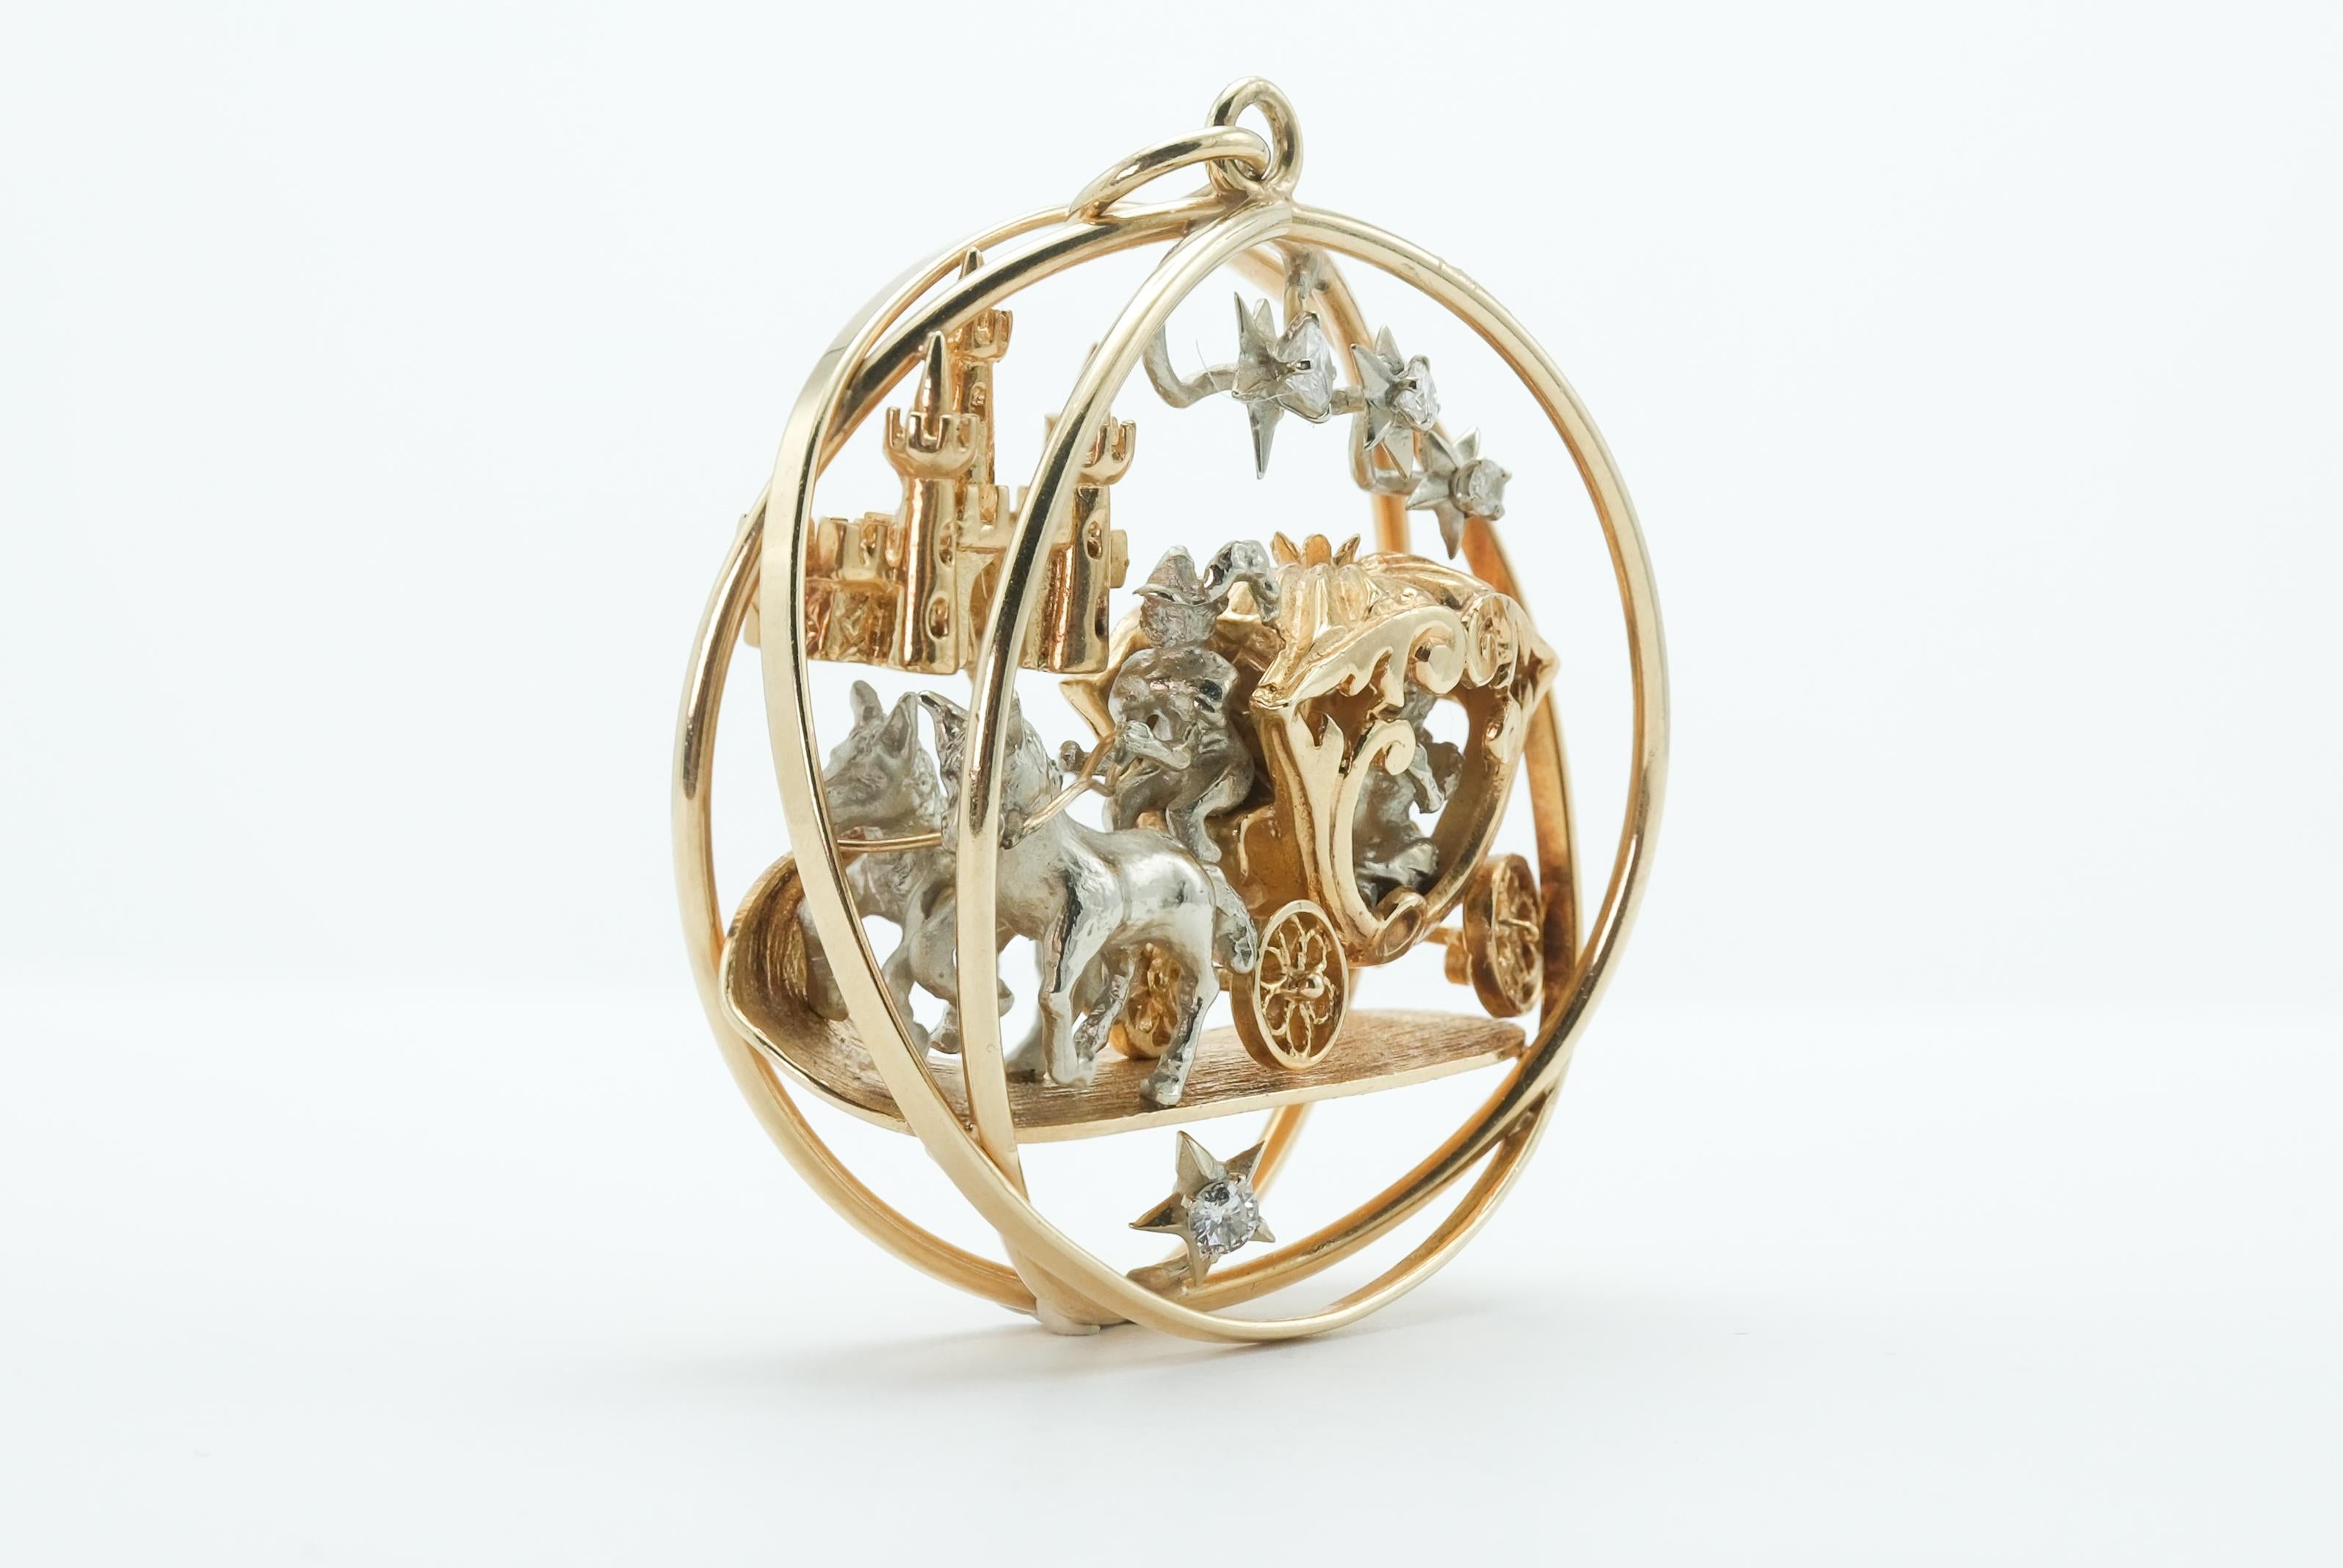 This meticulously crafted pendant is a unique masterpiece that brings to life an enchanting scene in 14 karat yellow and white gold. The image portrays a princess seated in a horse-drawn carriage, guided by a coachman and his two horses journeying